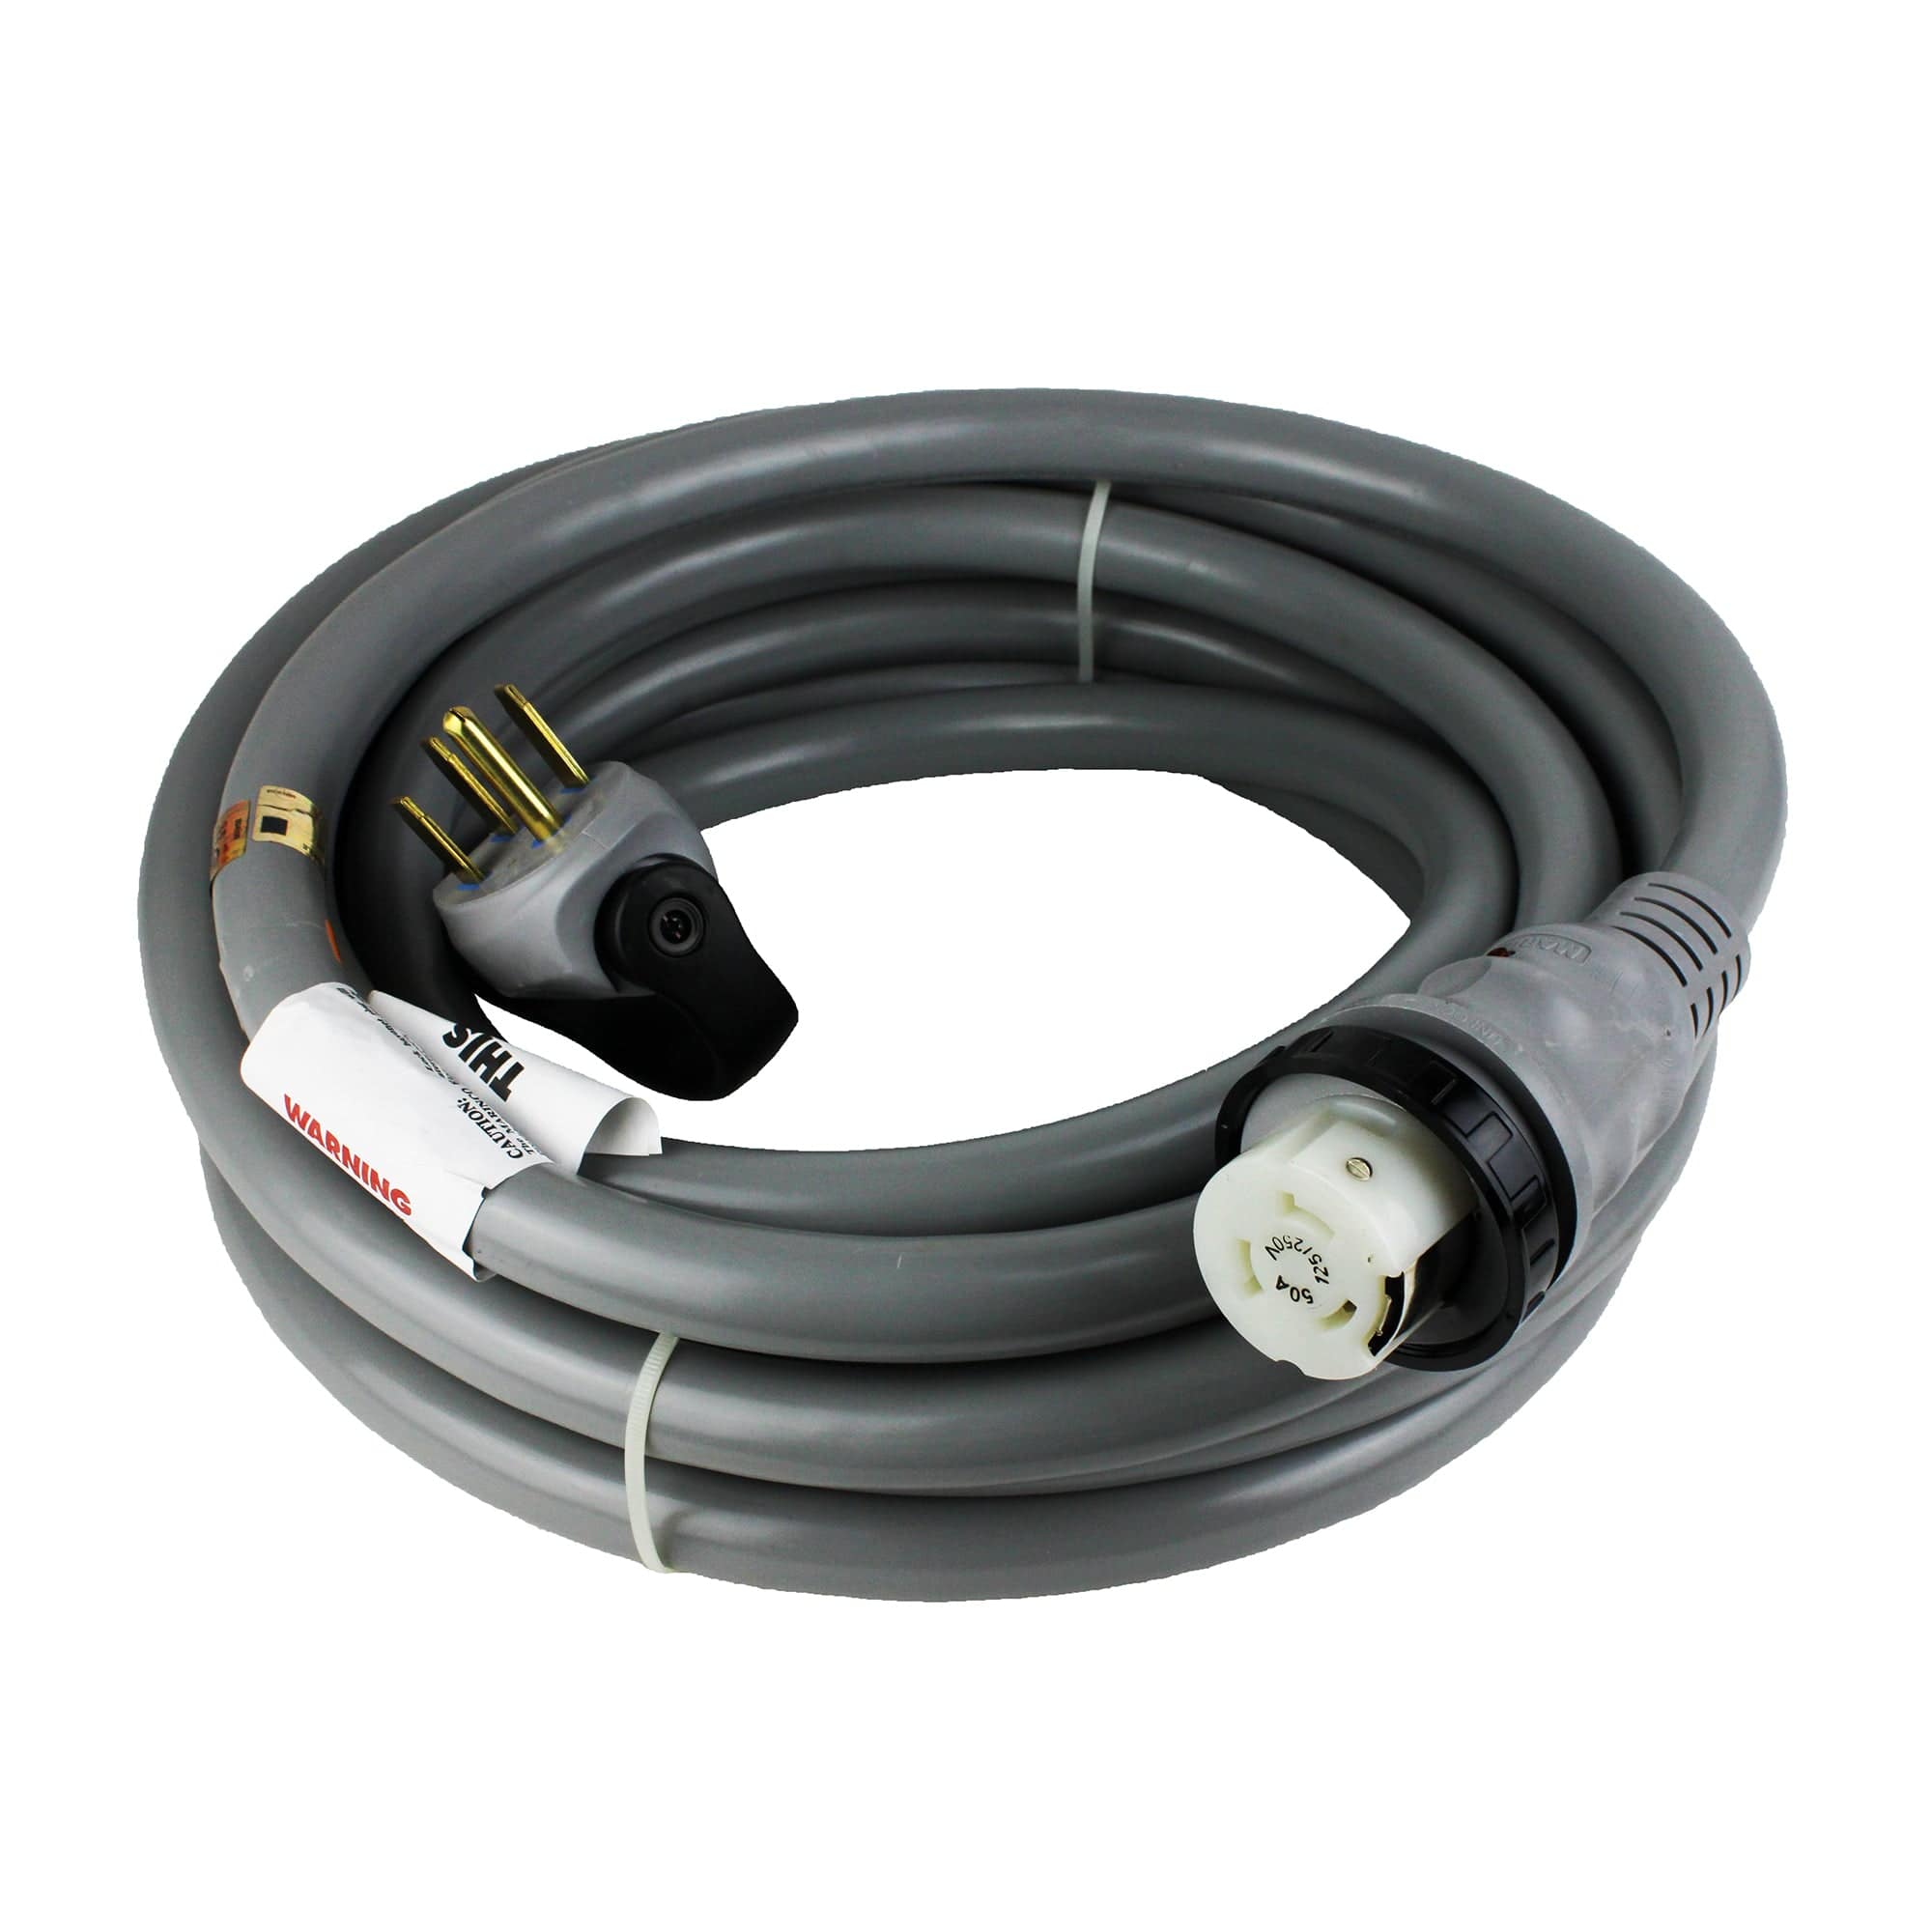 ParkPower 6152SPPGRV-36 36' Extension Power Cord with Handle Grip